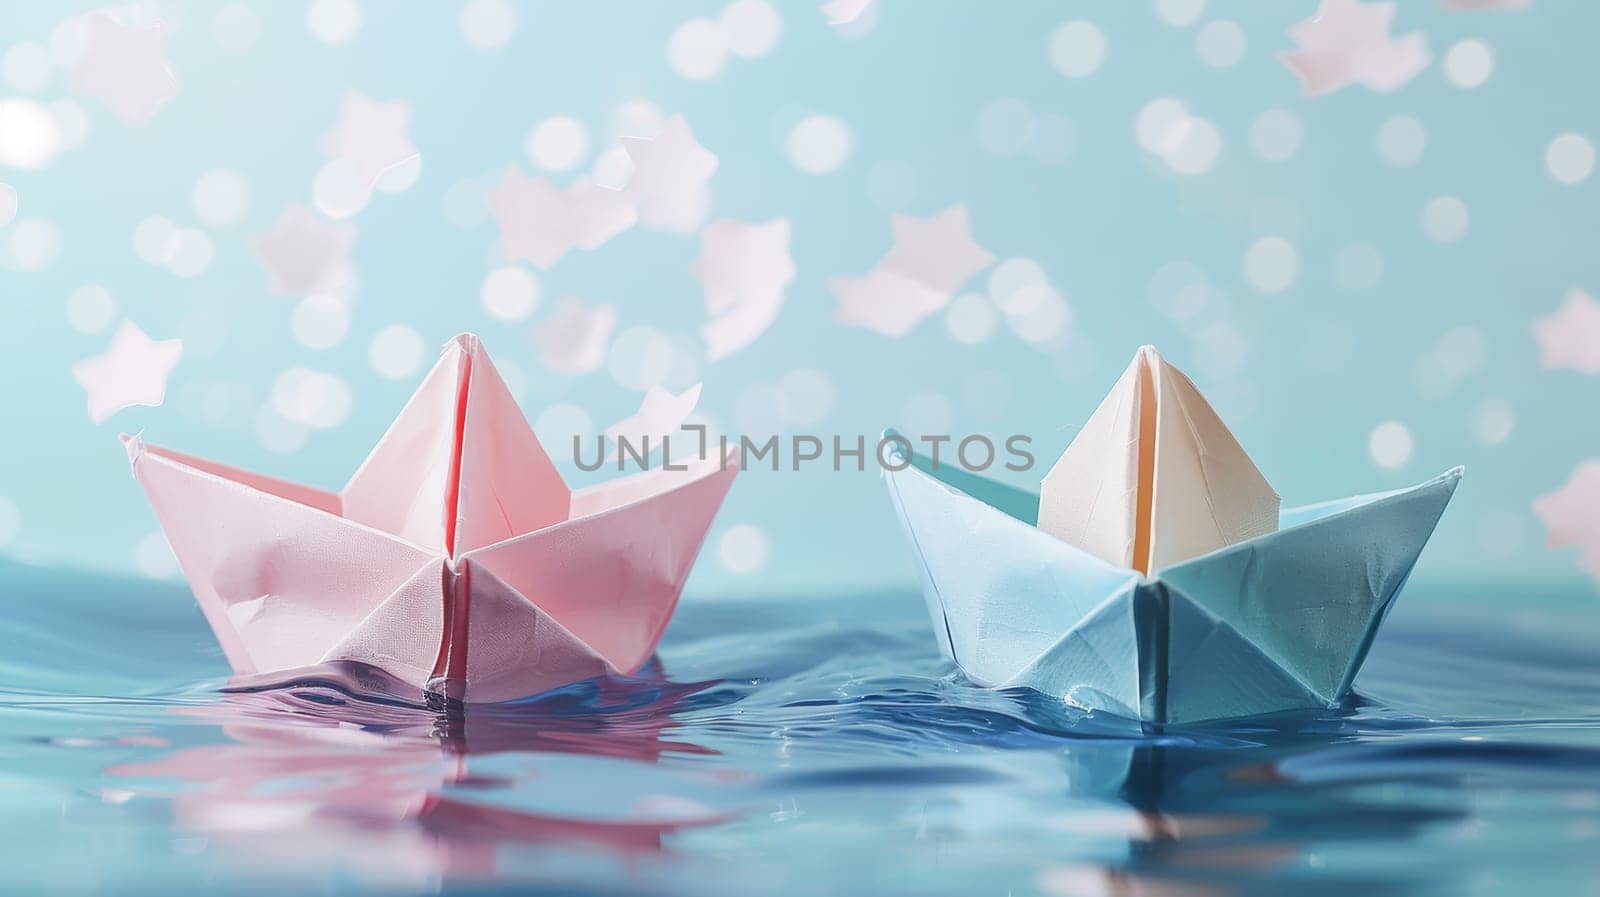 Origami paper boats sailing on tranquil waters with bokeh background. Concept of imagination, adventure, dreams, and serenity